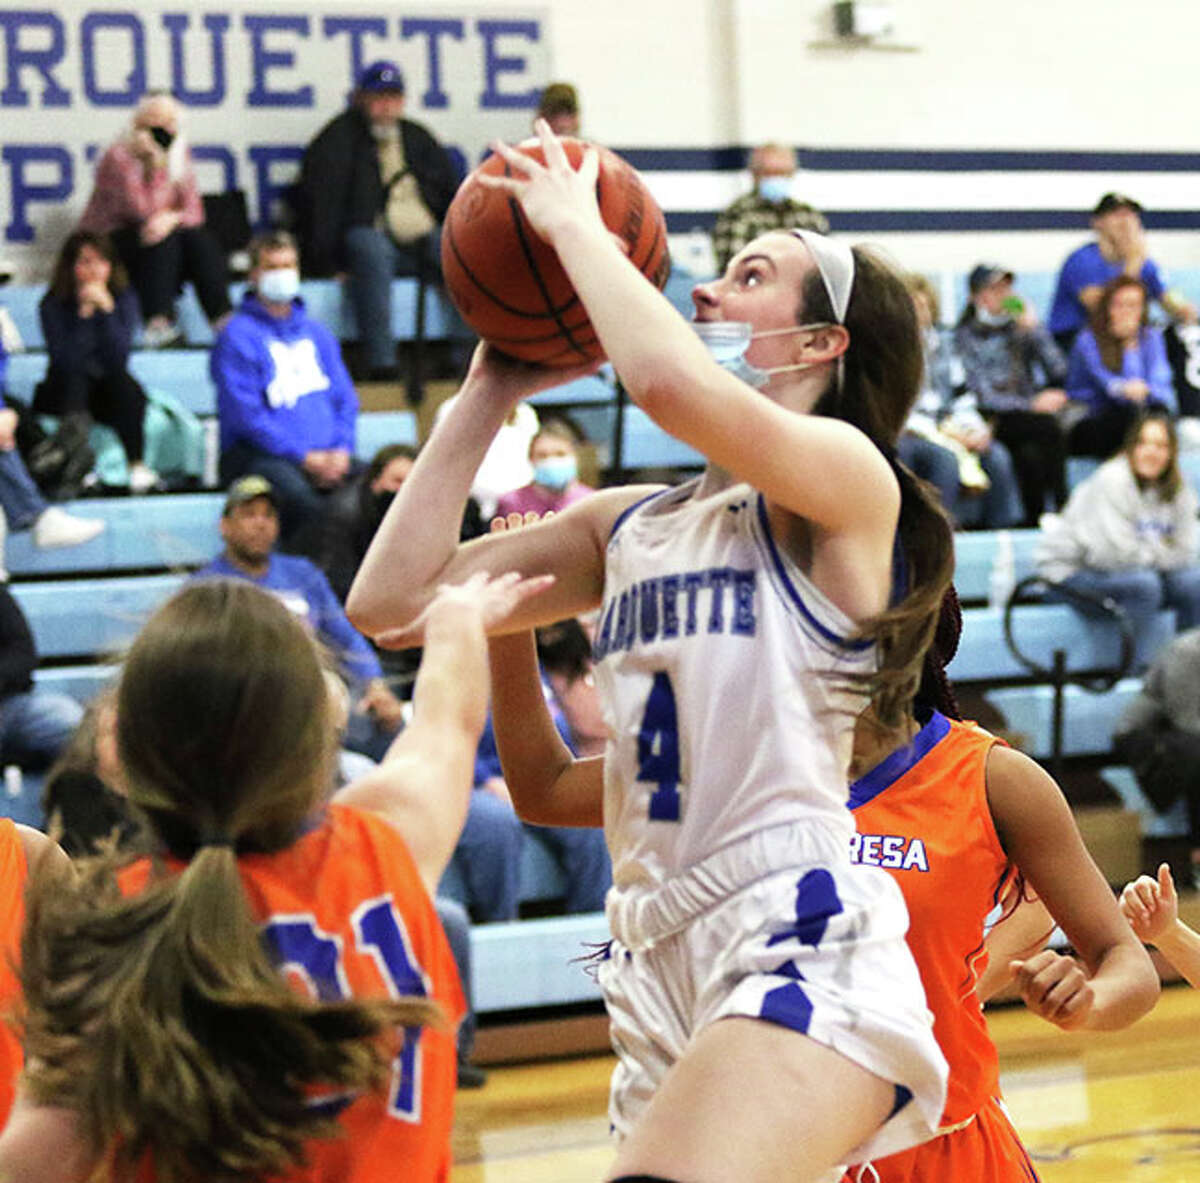 Marquette's Abby Williams (4) puts up a shot in the lane against Decatur St. Teresa earlier this season in Alton. On Monday night back at home, Williams had nine points and seven rebounds in an Explorers' win over Collinsville.